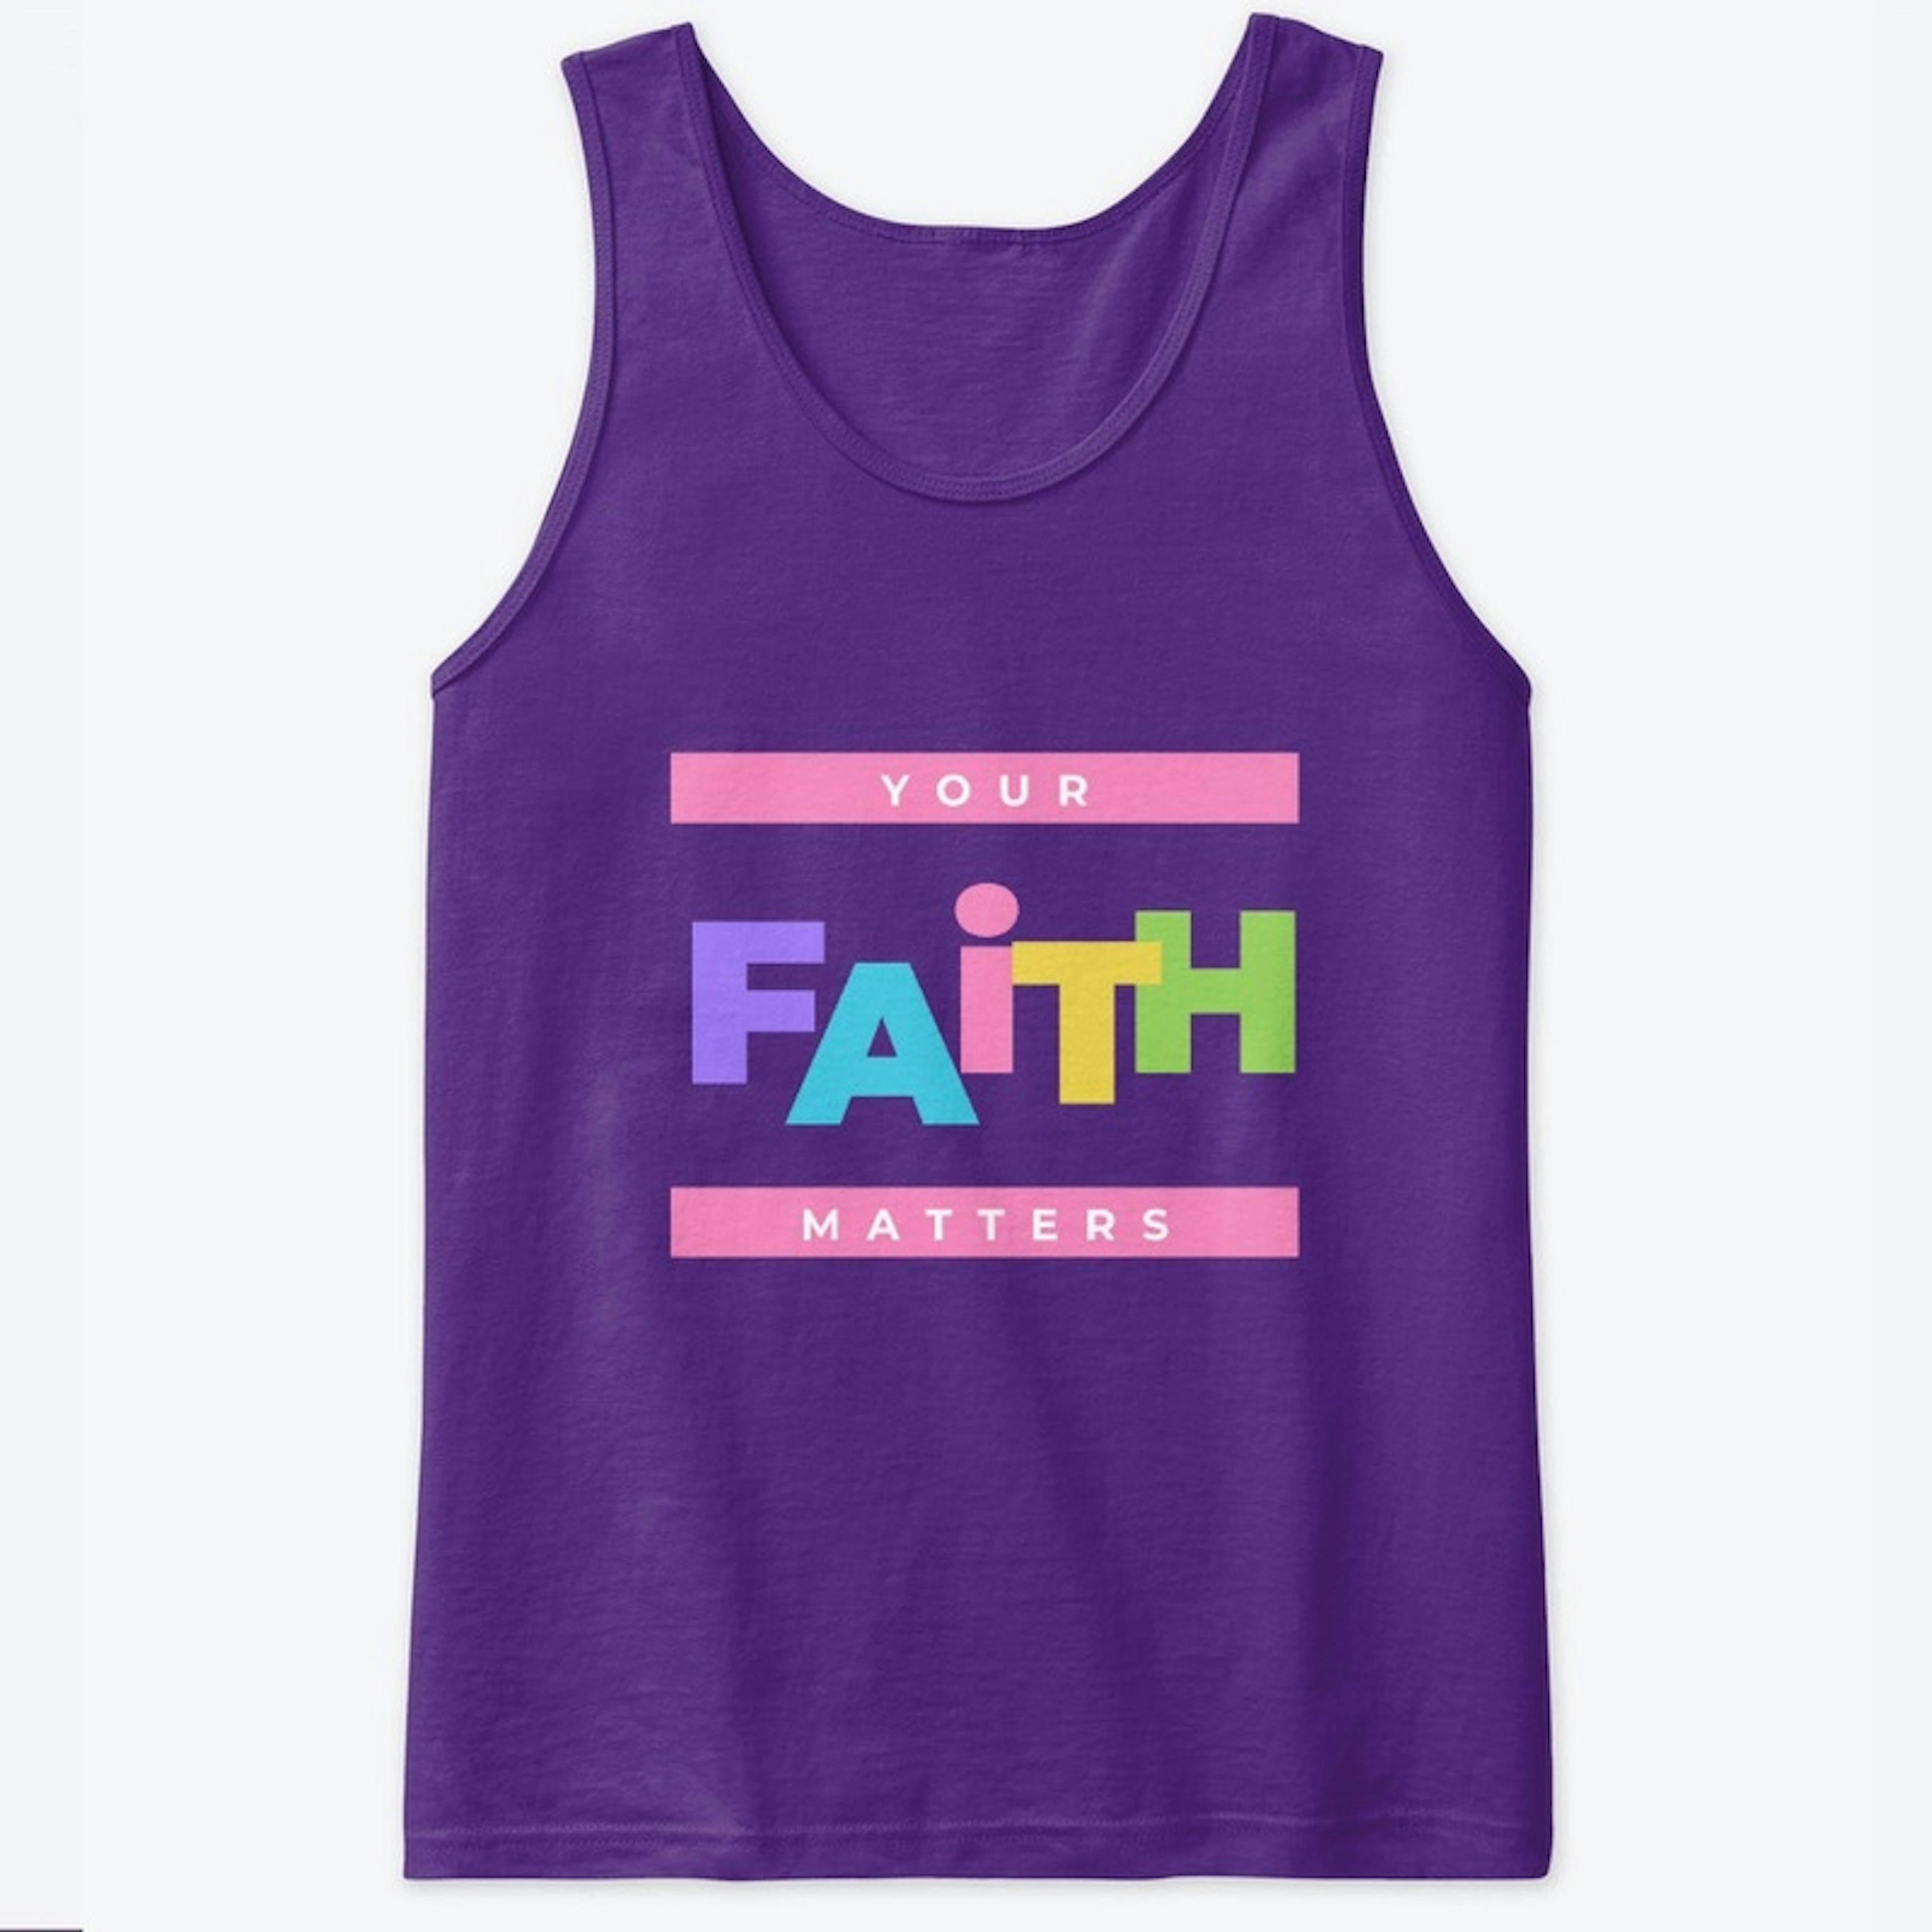 Your Faith Matters